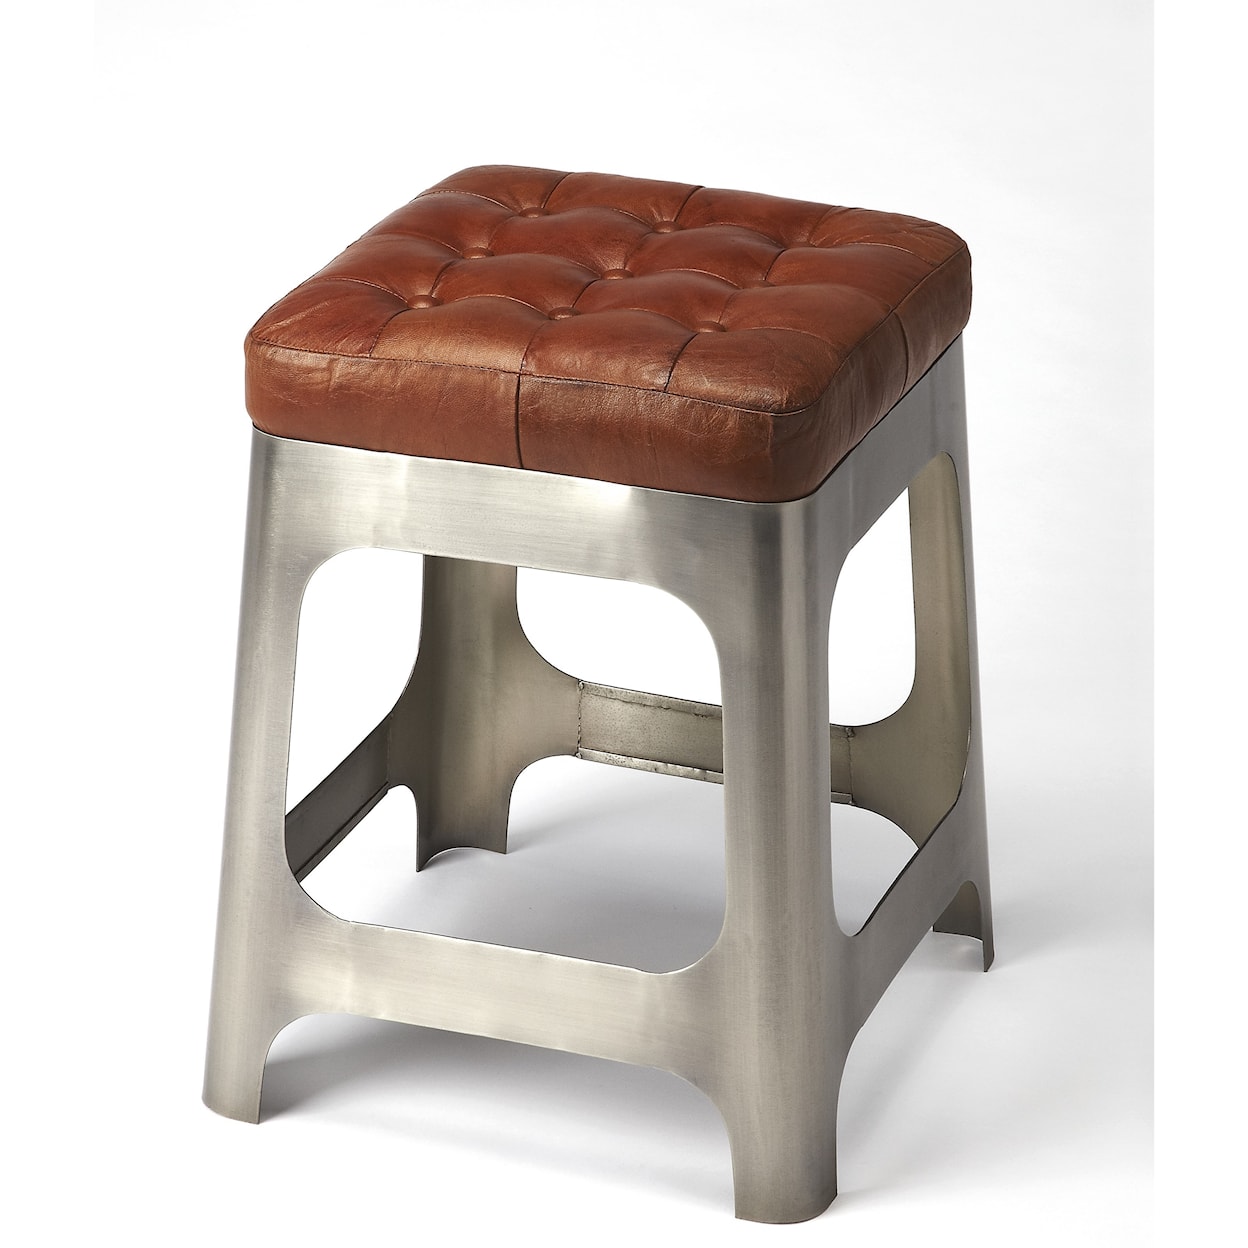 Butler Specialty Company Industrial Chic Counter Stool